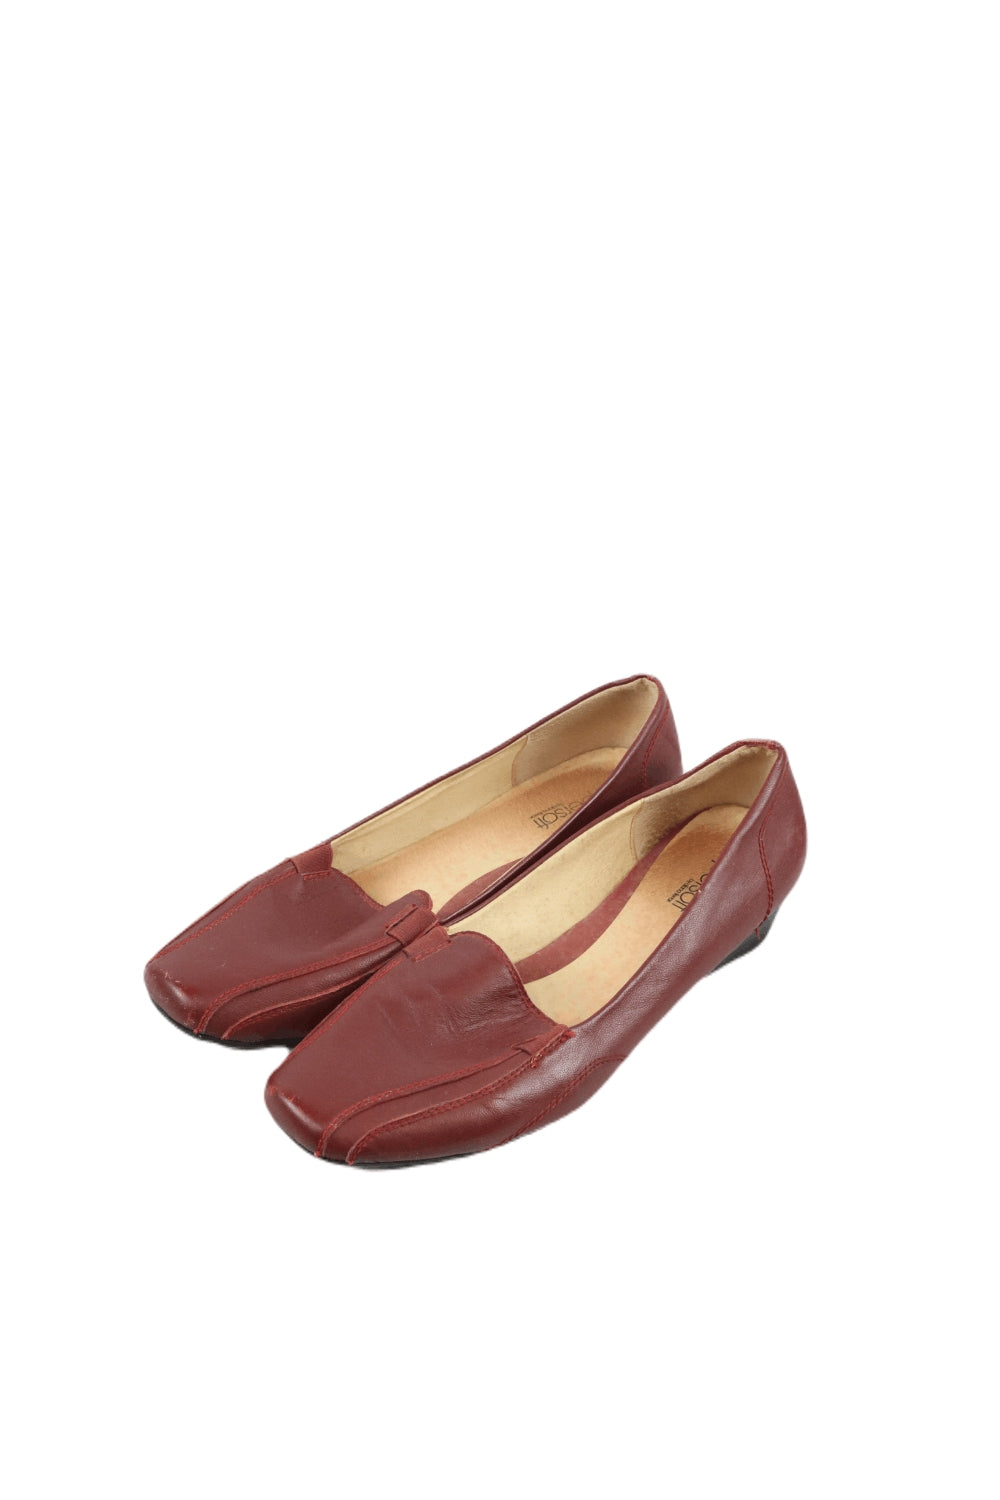 Supersoft Burgundy Shoes 10